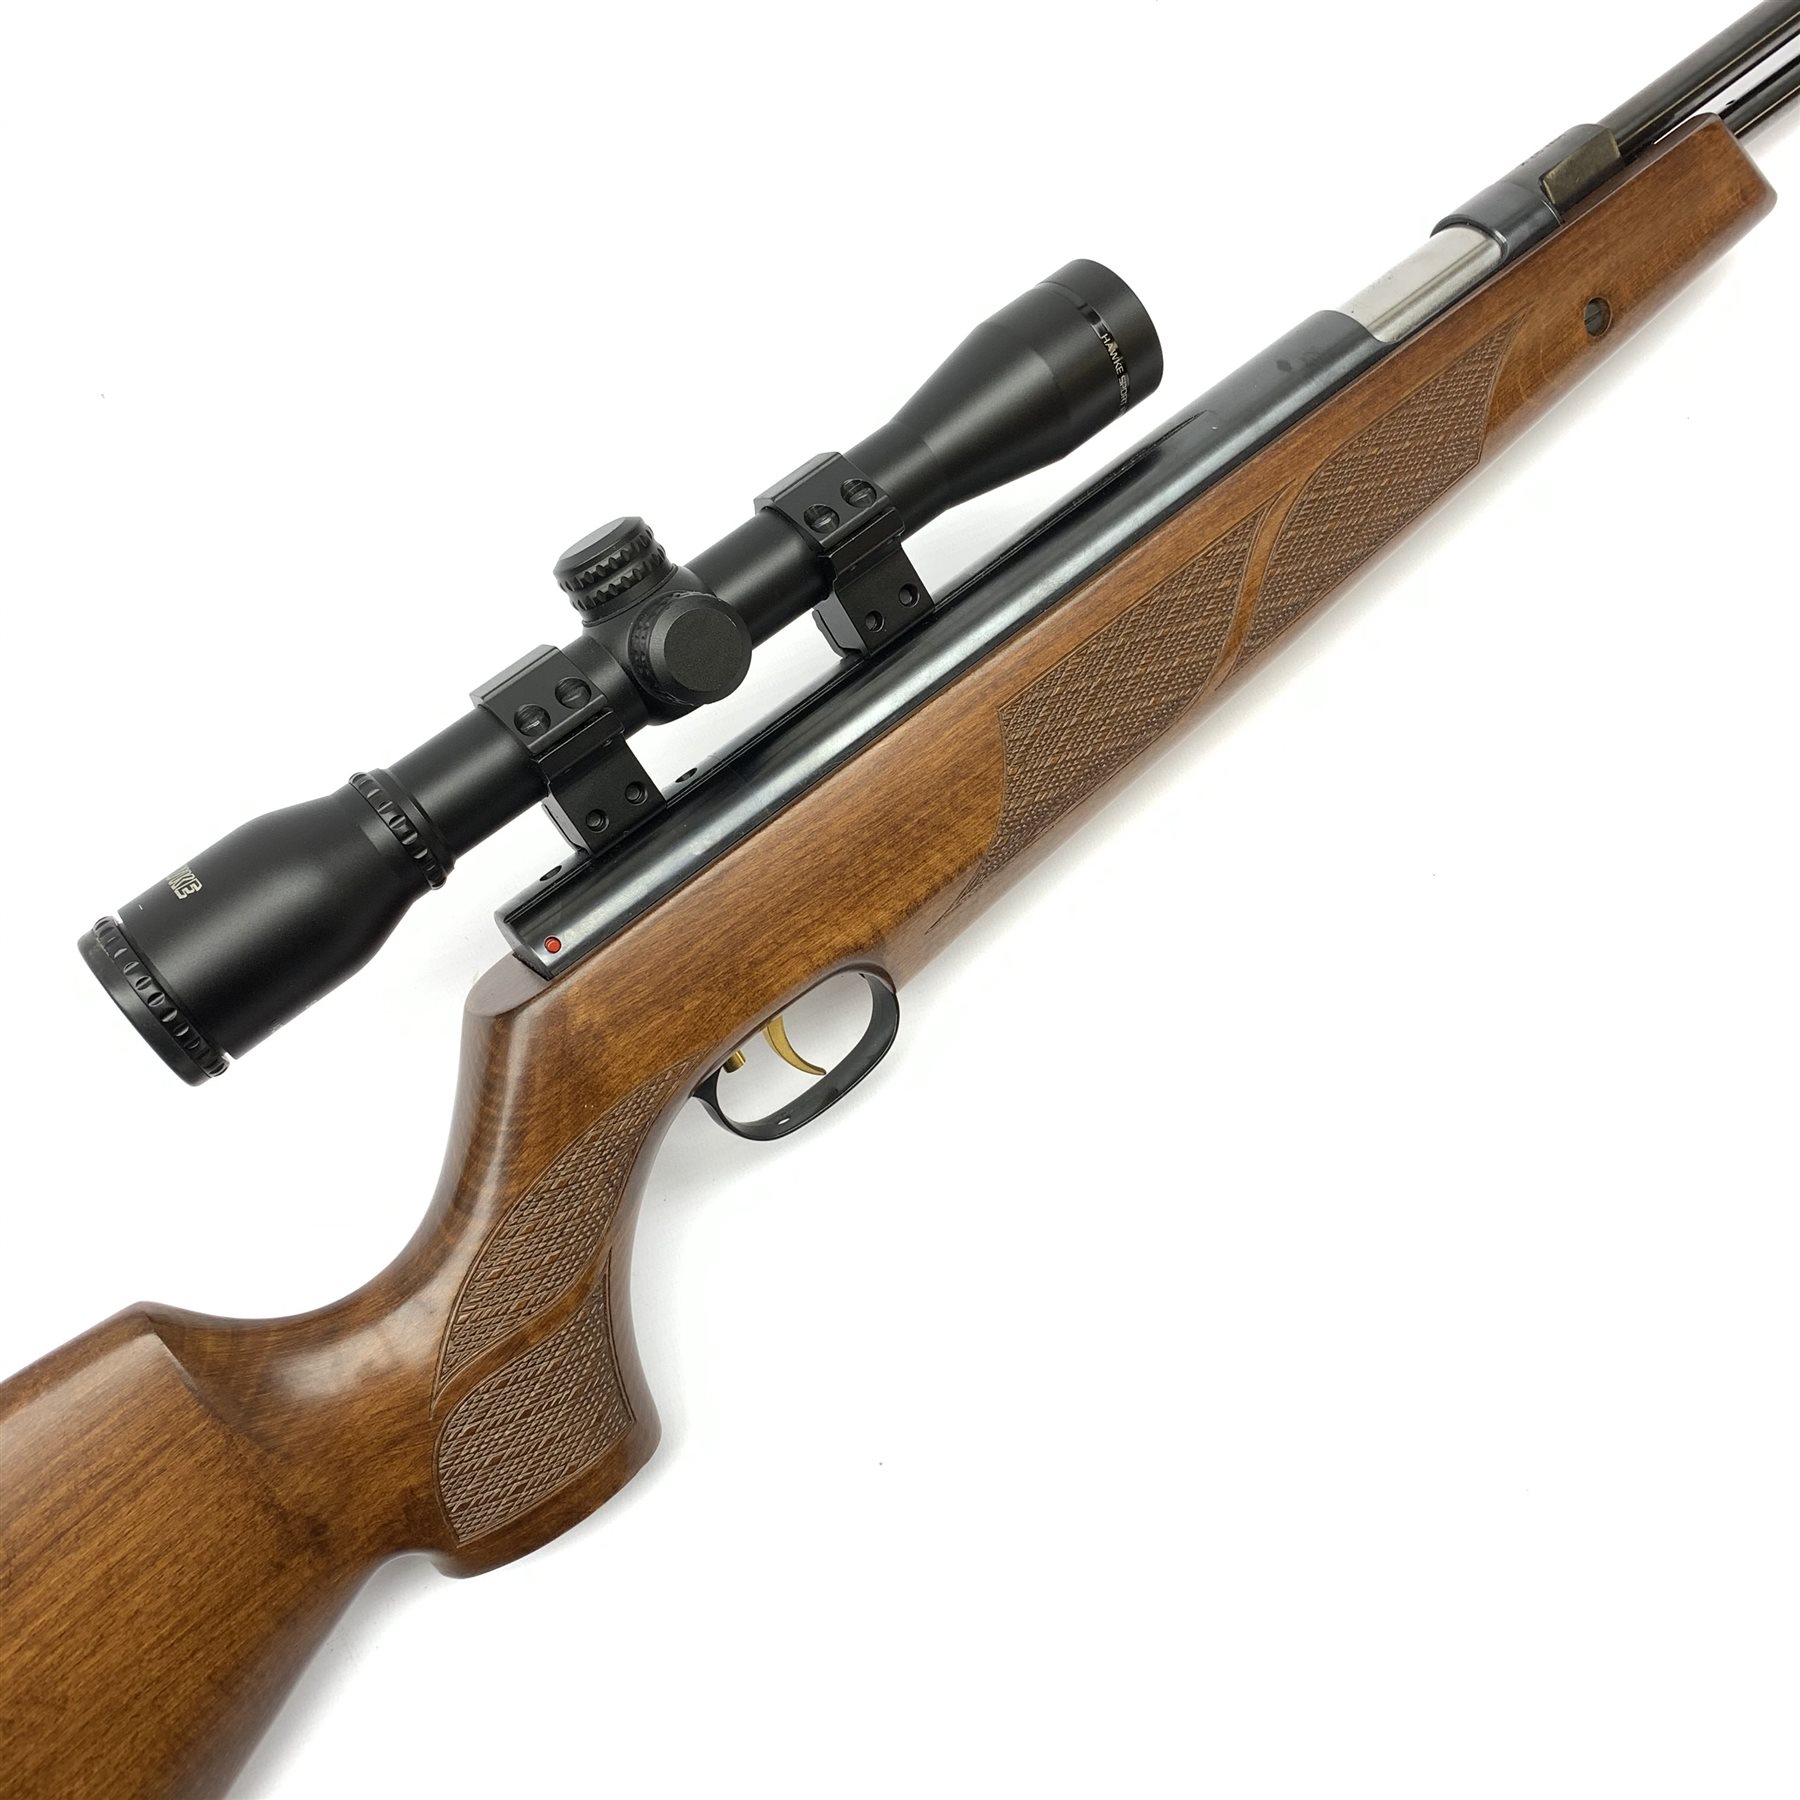 Weirauch HW97K .22 air rifle with under lever action, chequered pistol grip and fore-end, fitted int